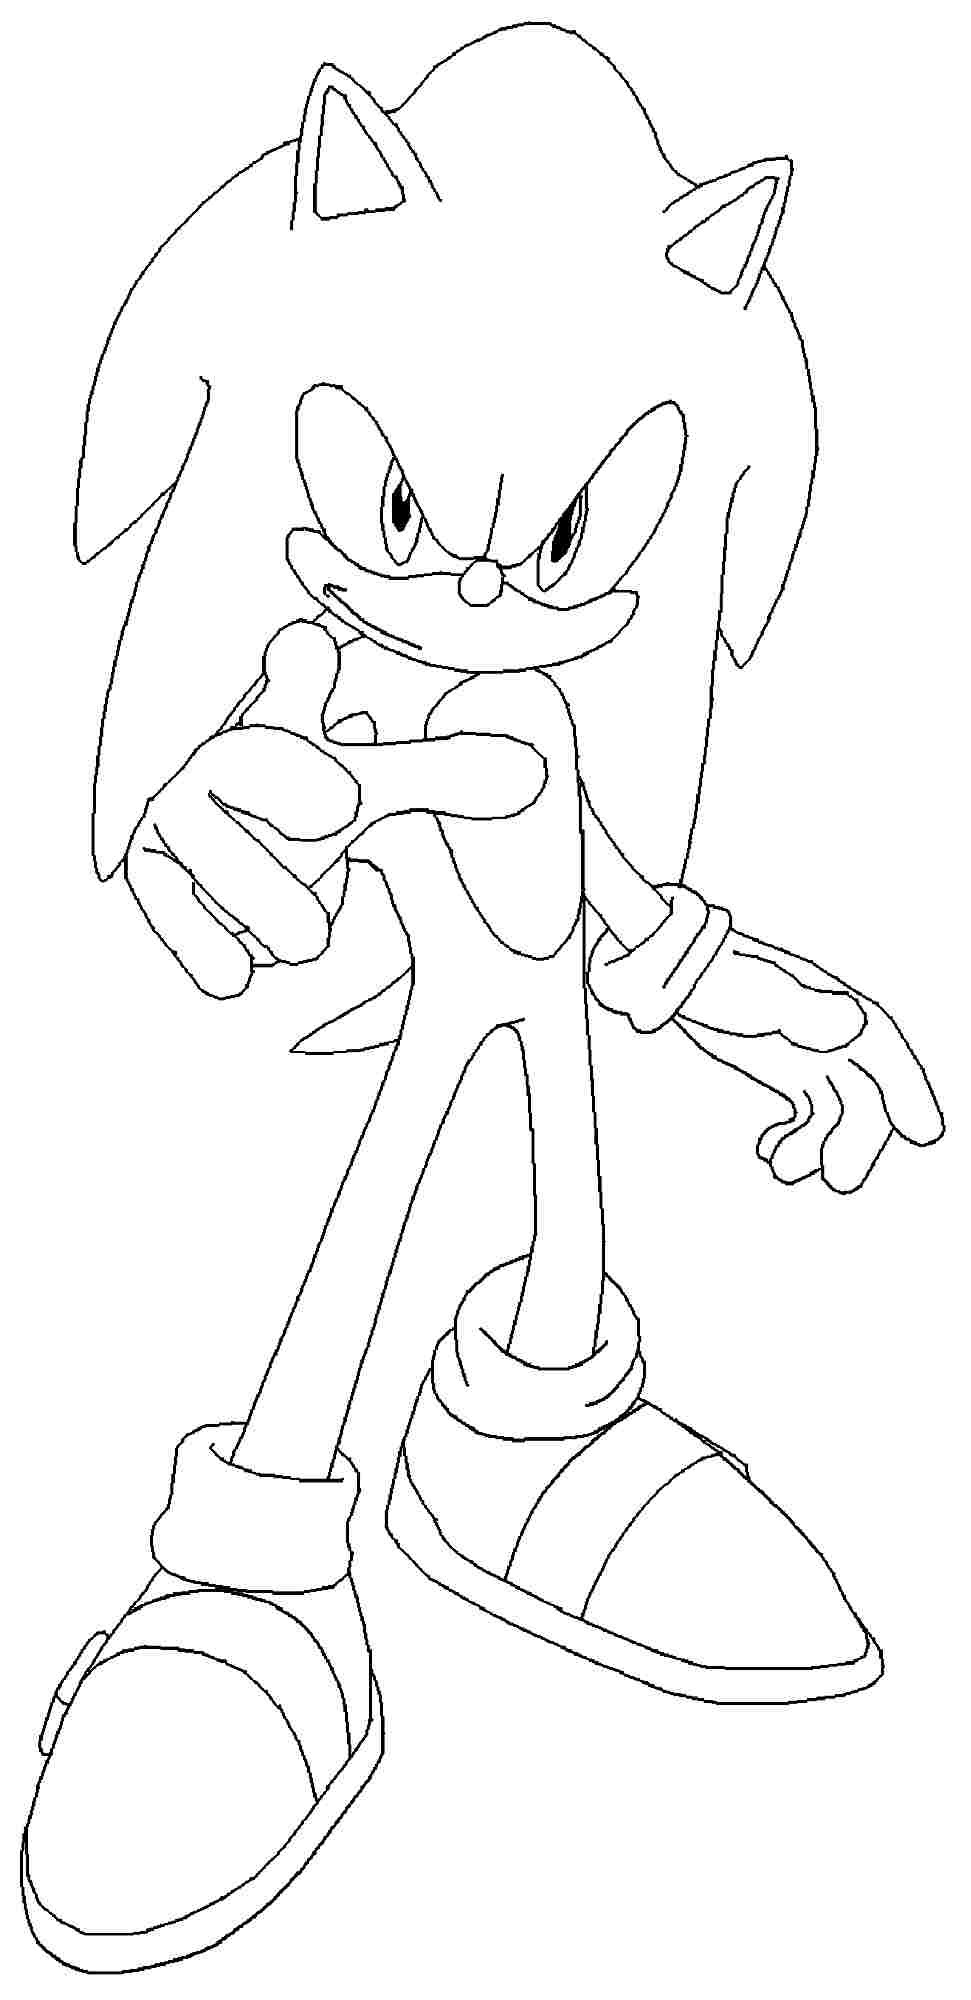 Classic Sonic And Amy Coloring Page Coloring Pages